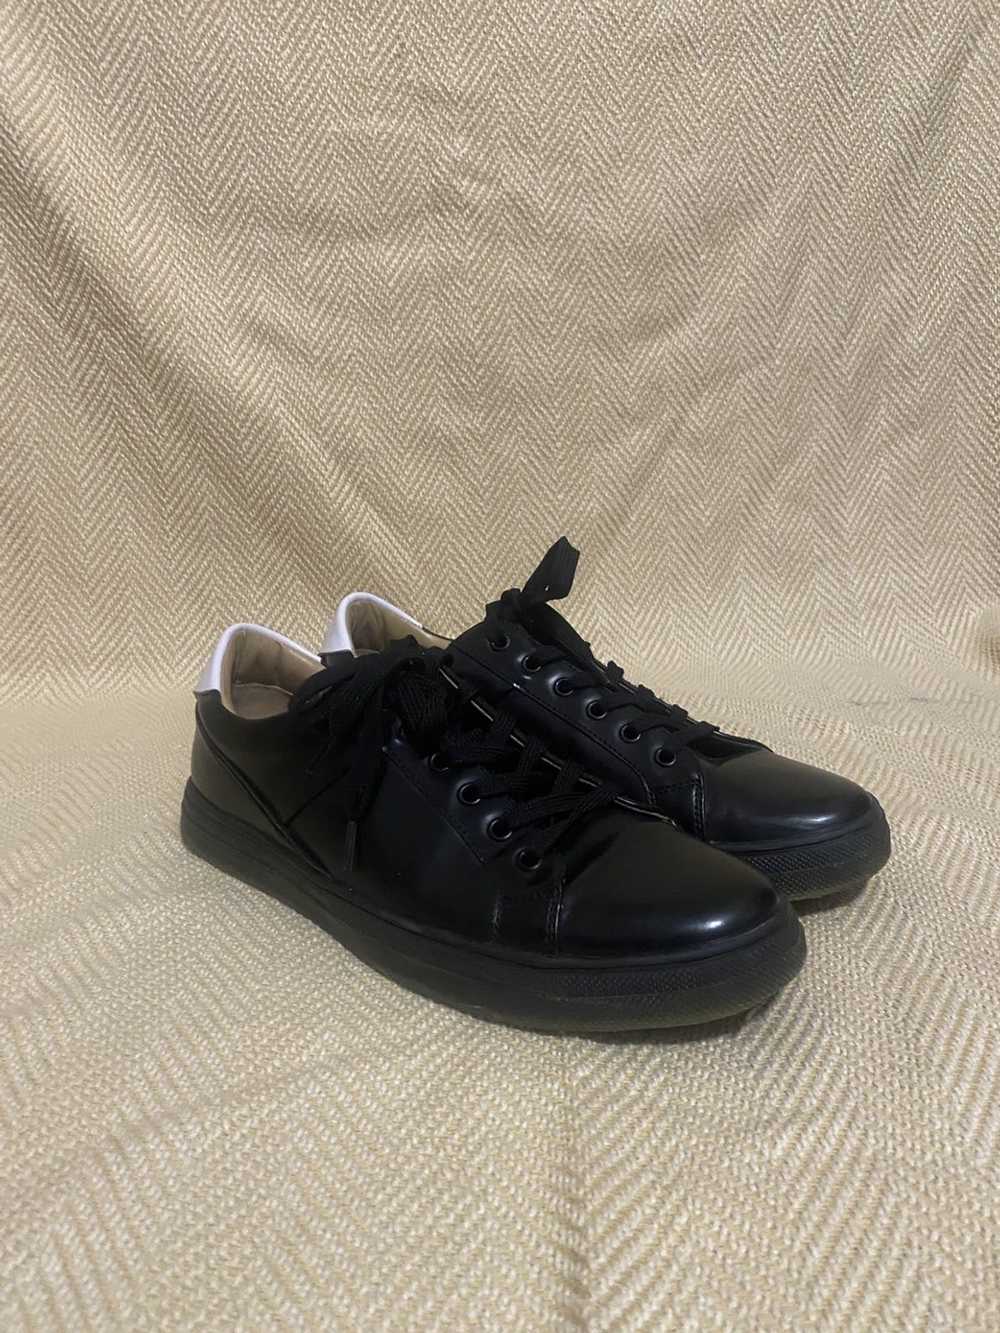 Kenneth Cole Kenneth Cole black leather sneakers - image 1